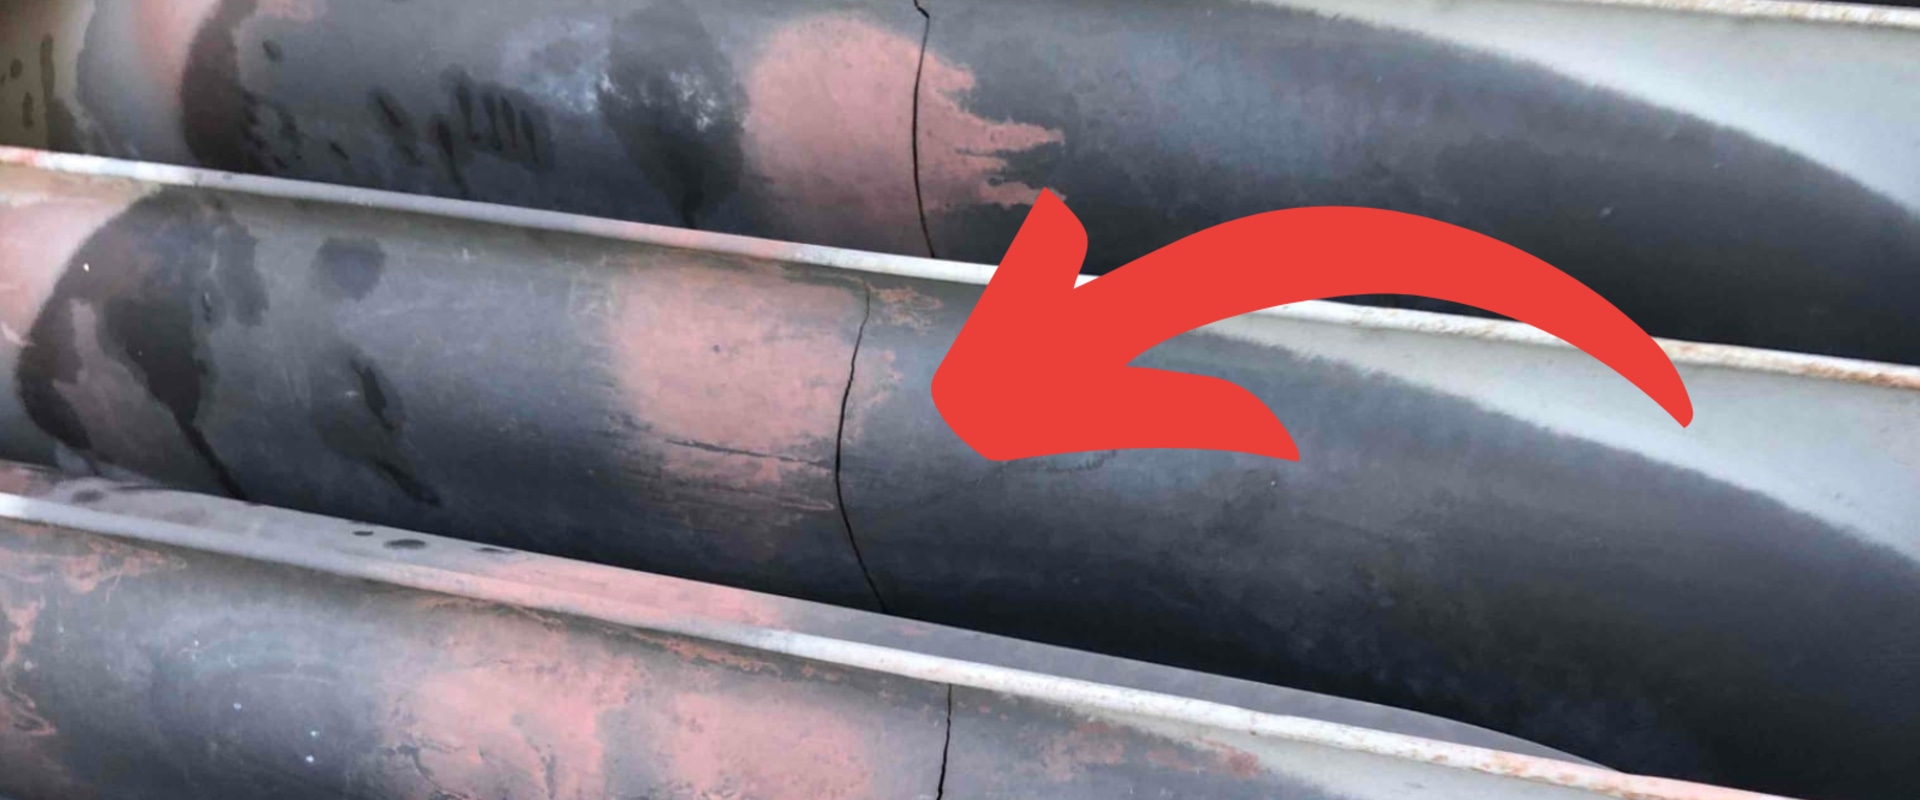 Can a cracked furnace be repaired?